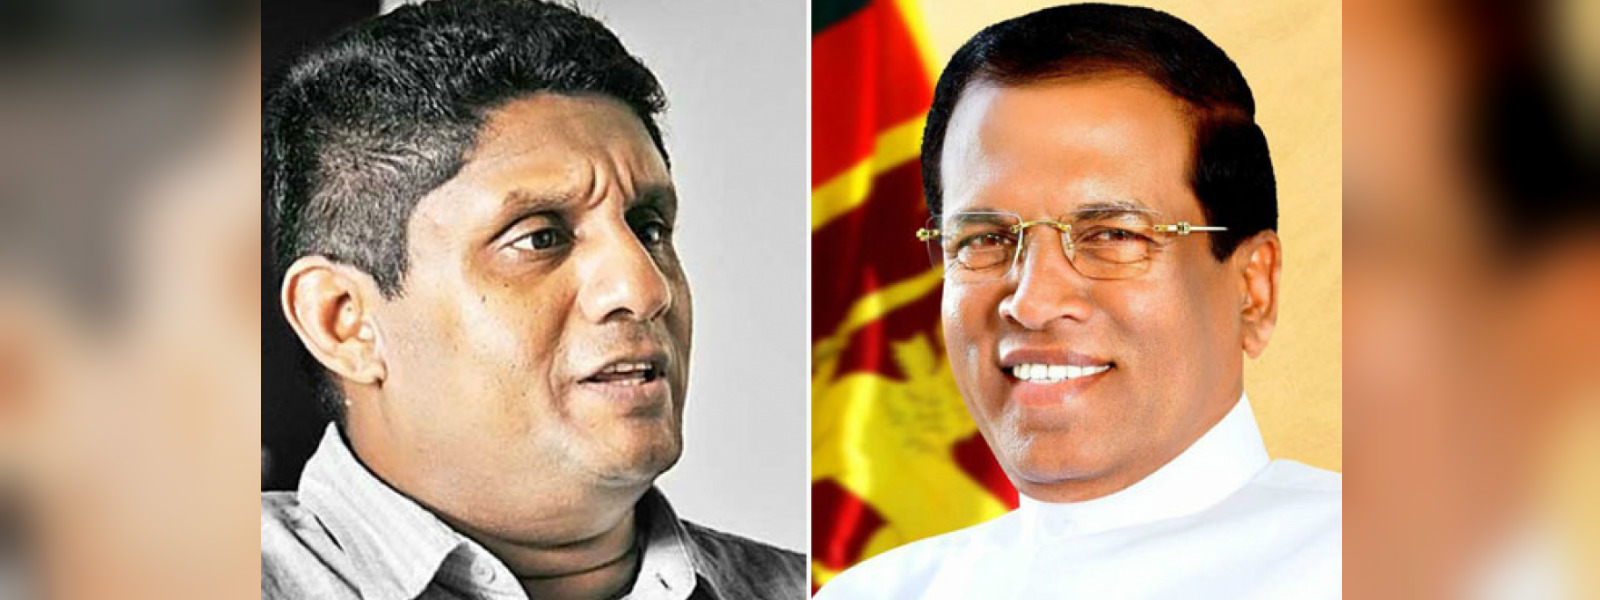 Talks between Sajith and the President